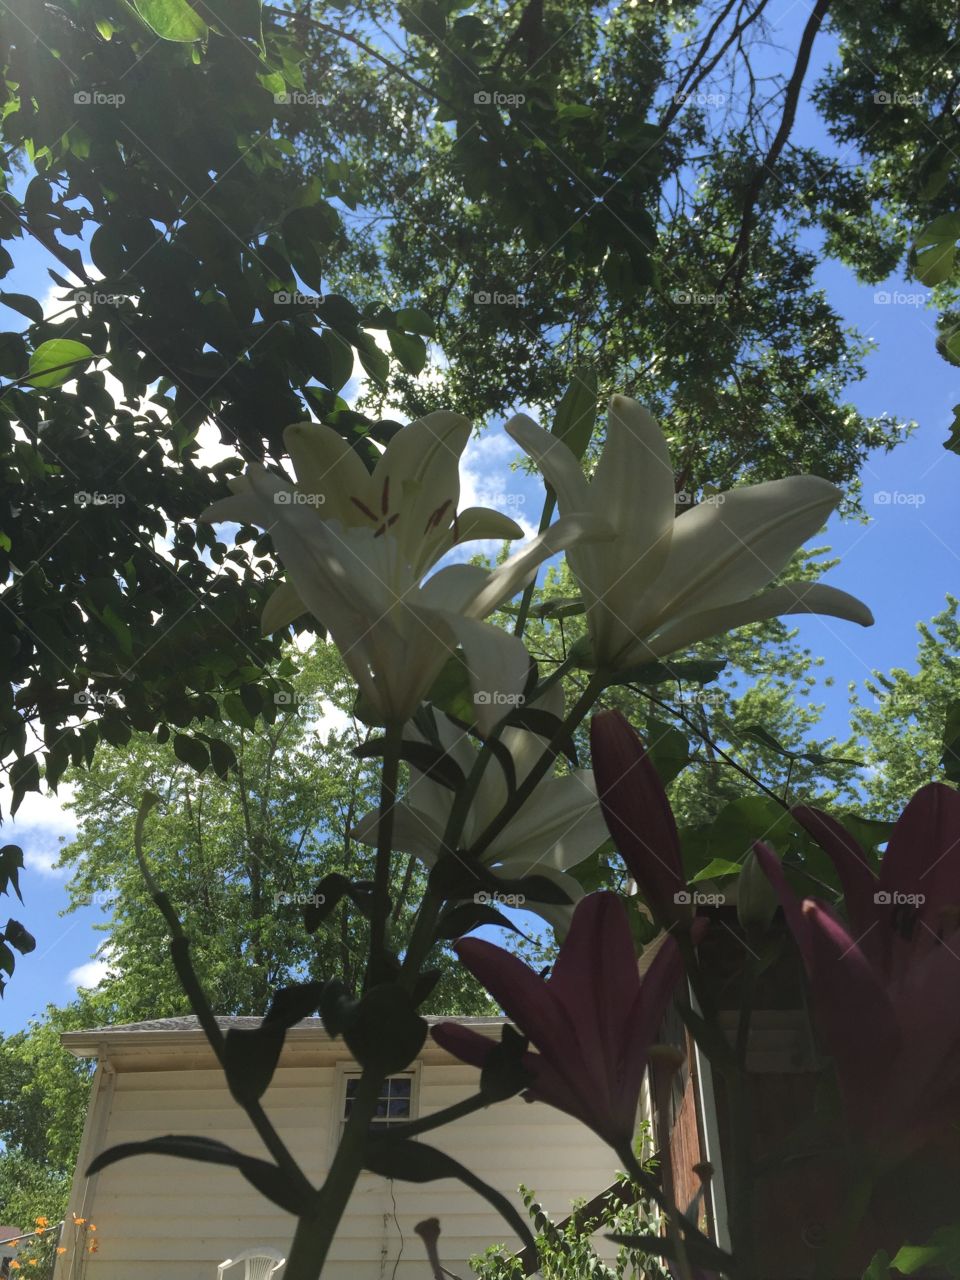 White Lilies against the Sky